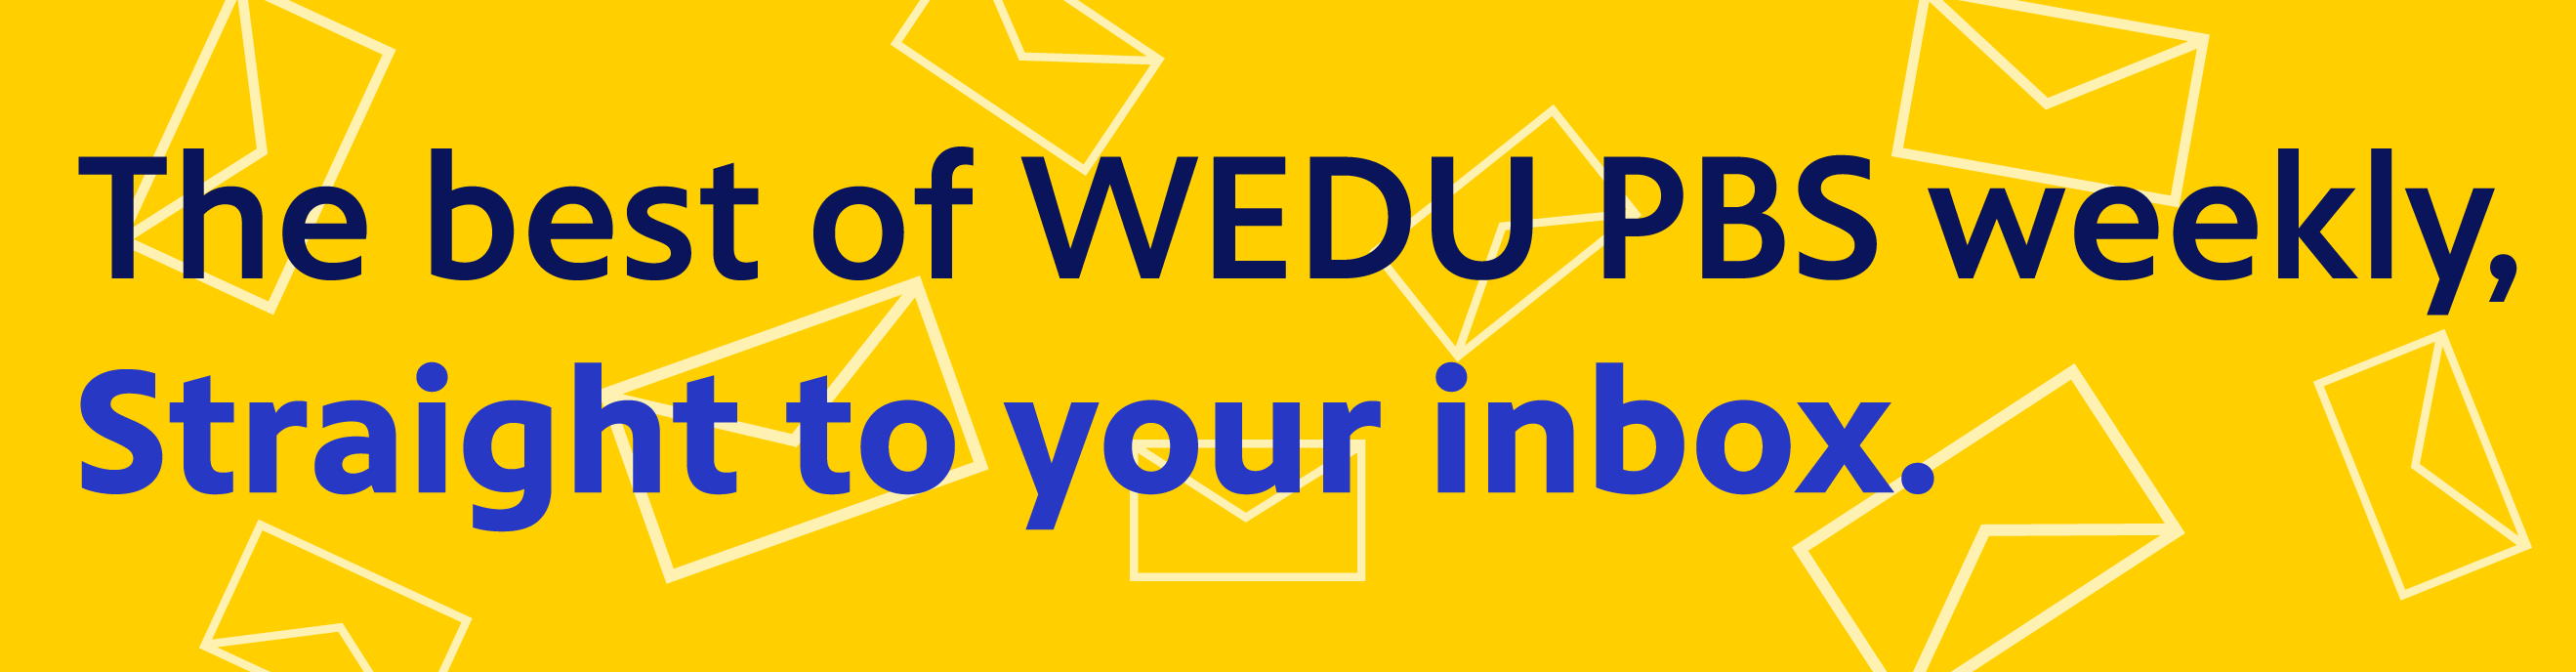 The best of WEDU PBS weekly, Straight to your inbox.